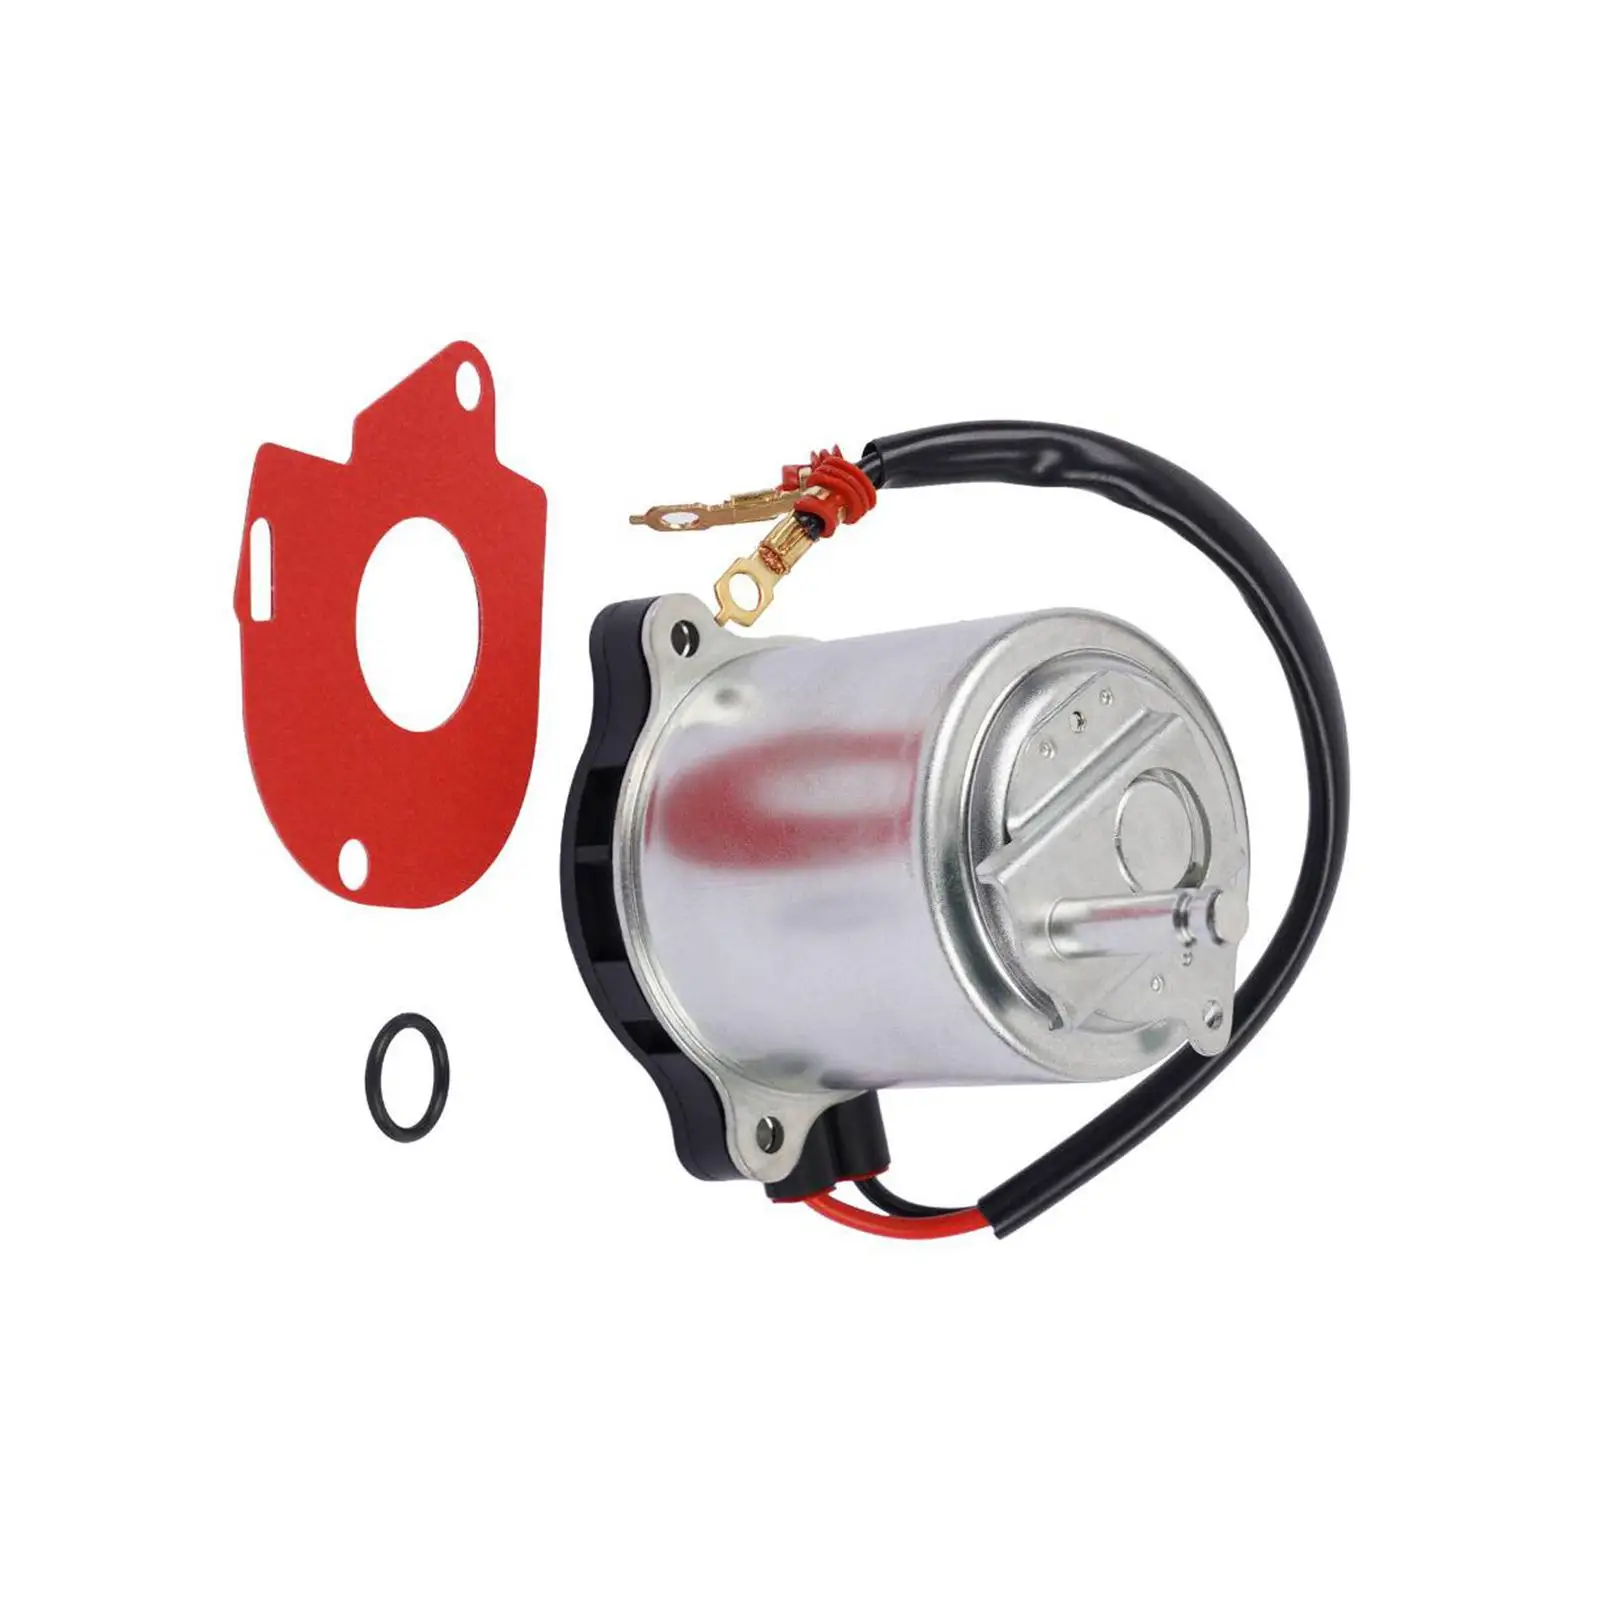 Brake Booster Pump Motor Installation 4796060050 Accessory High Quality Directly Replace for LX450D LX570 Gx470 Gx460